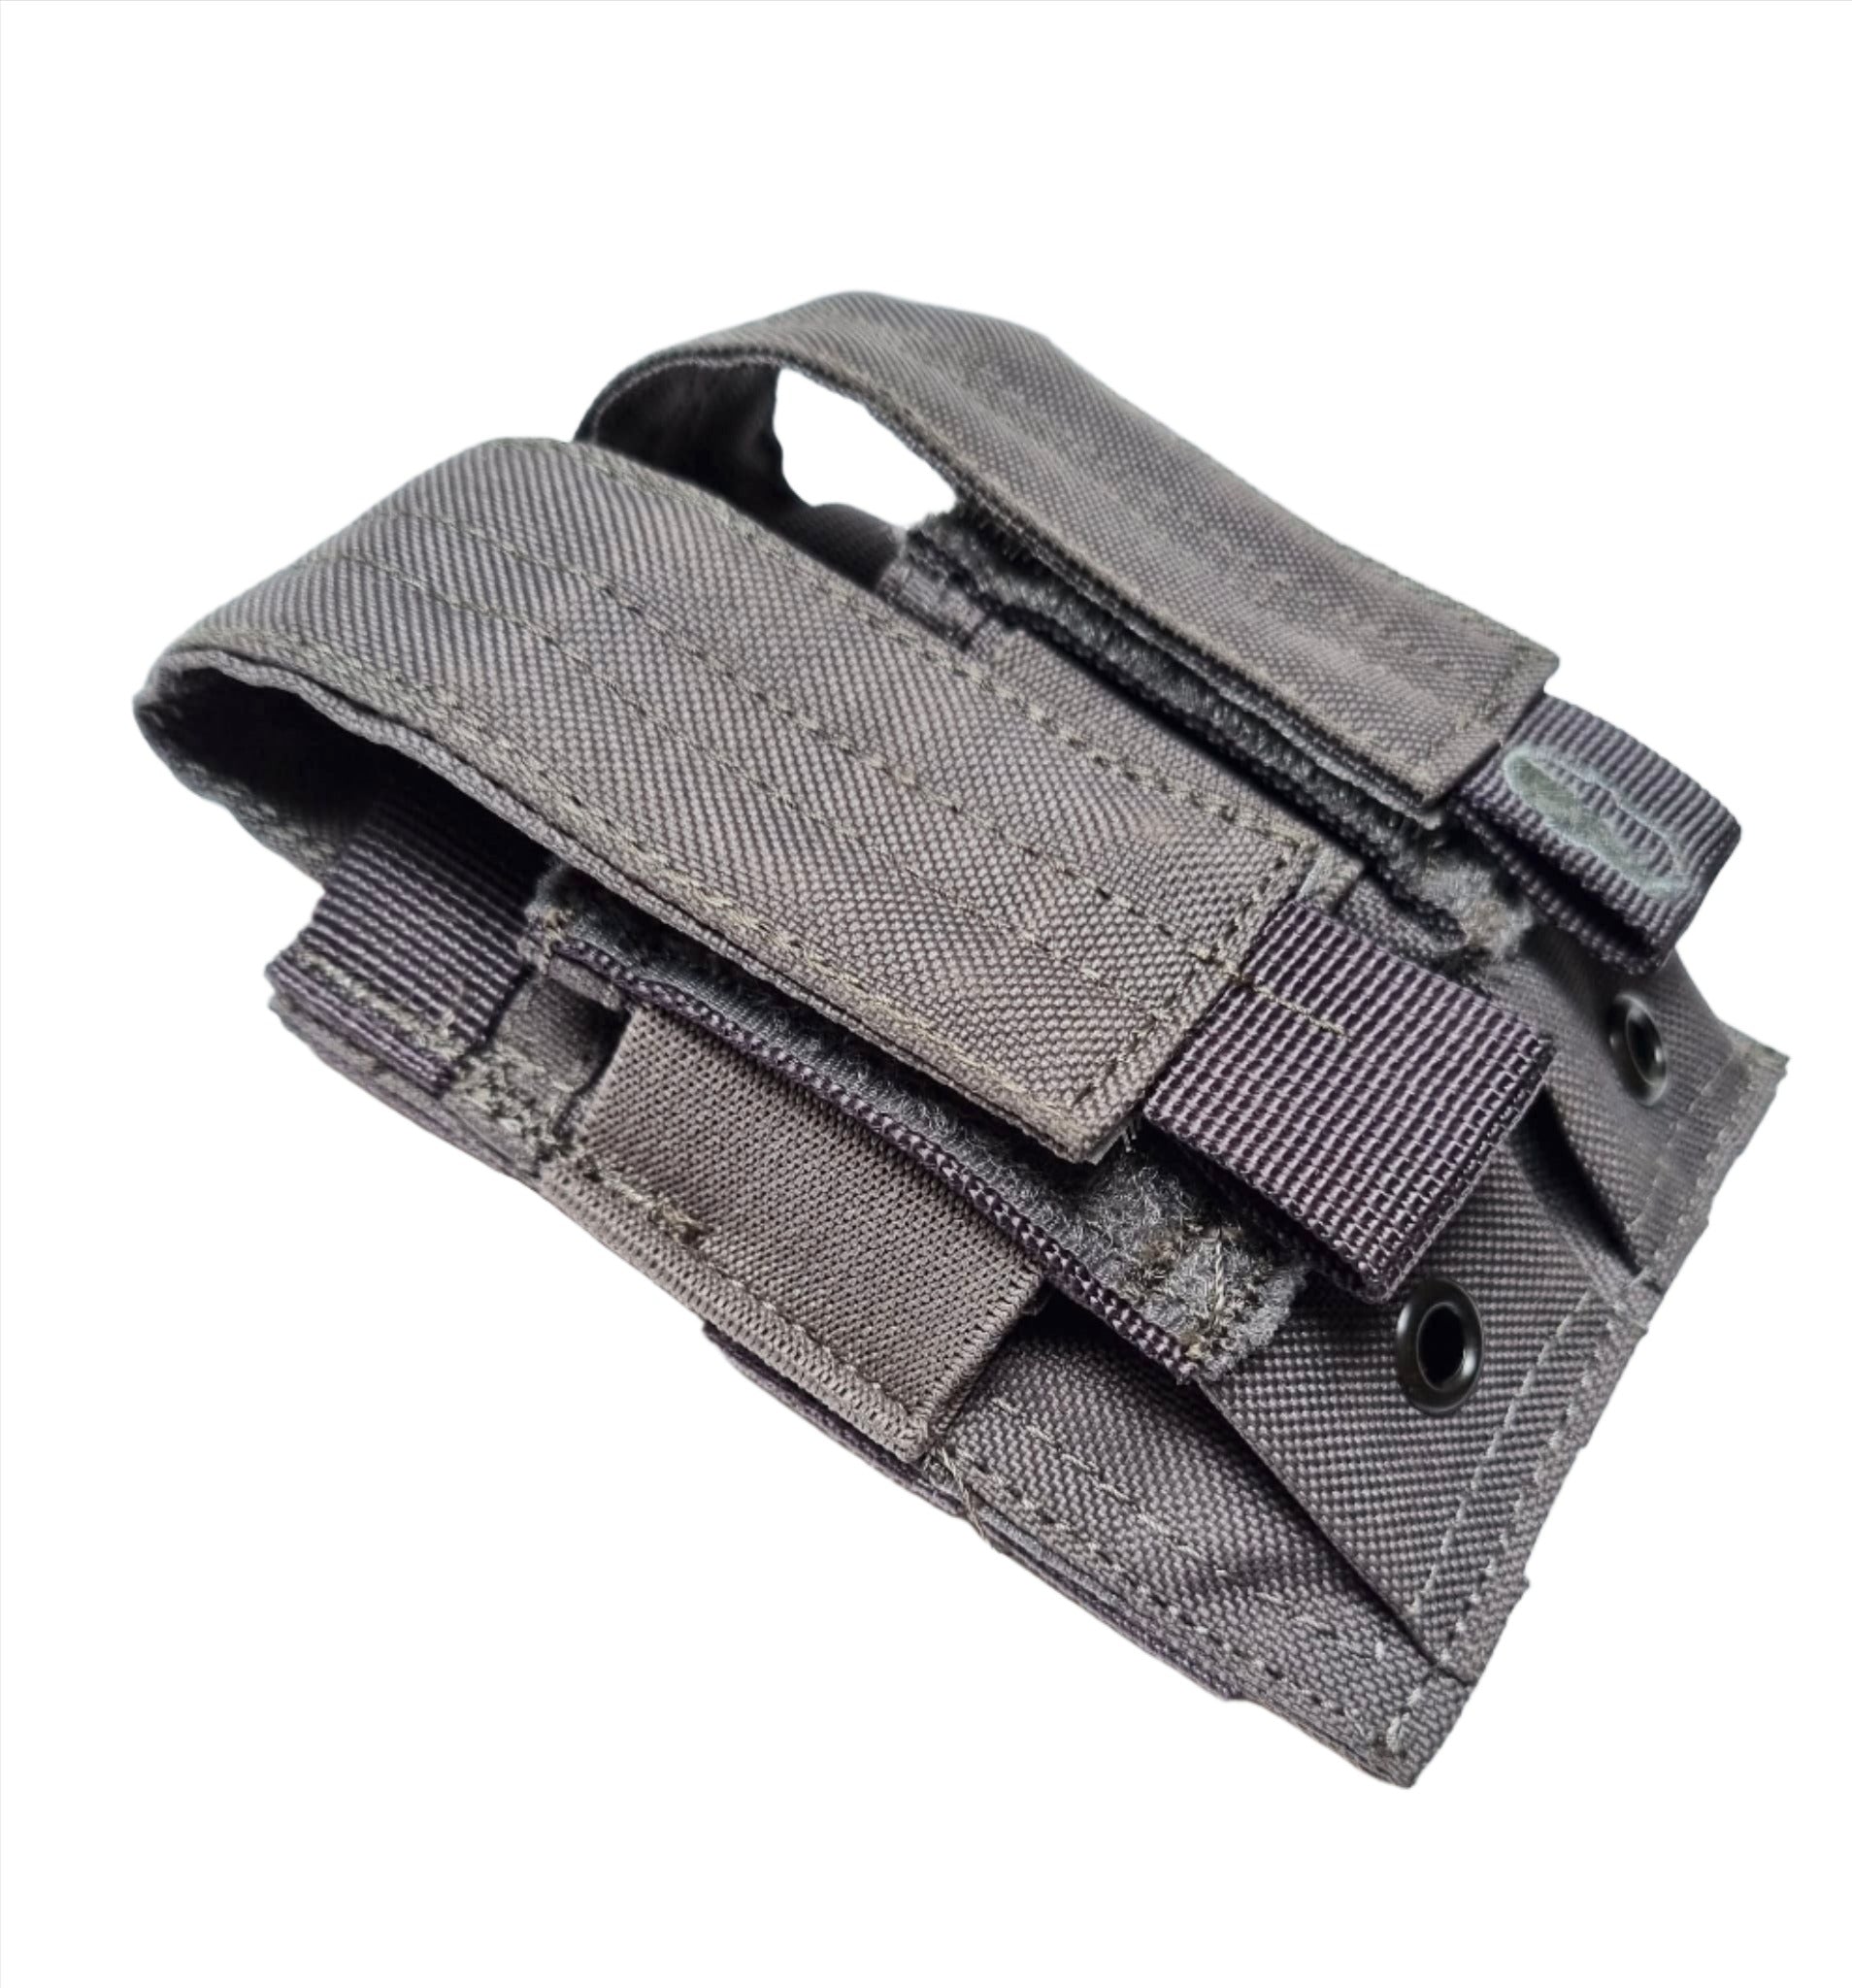 SHE-1065 Double Pistol Mag Pouch GREY